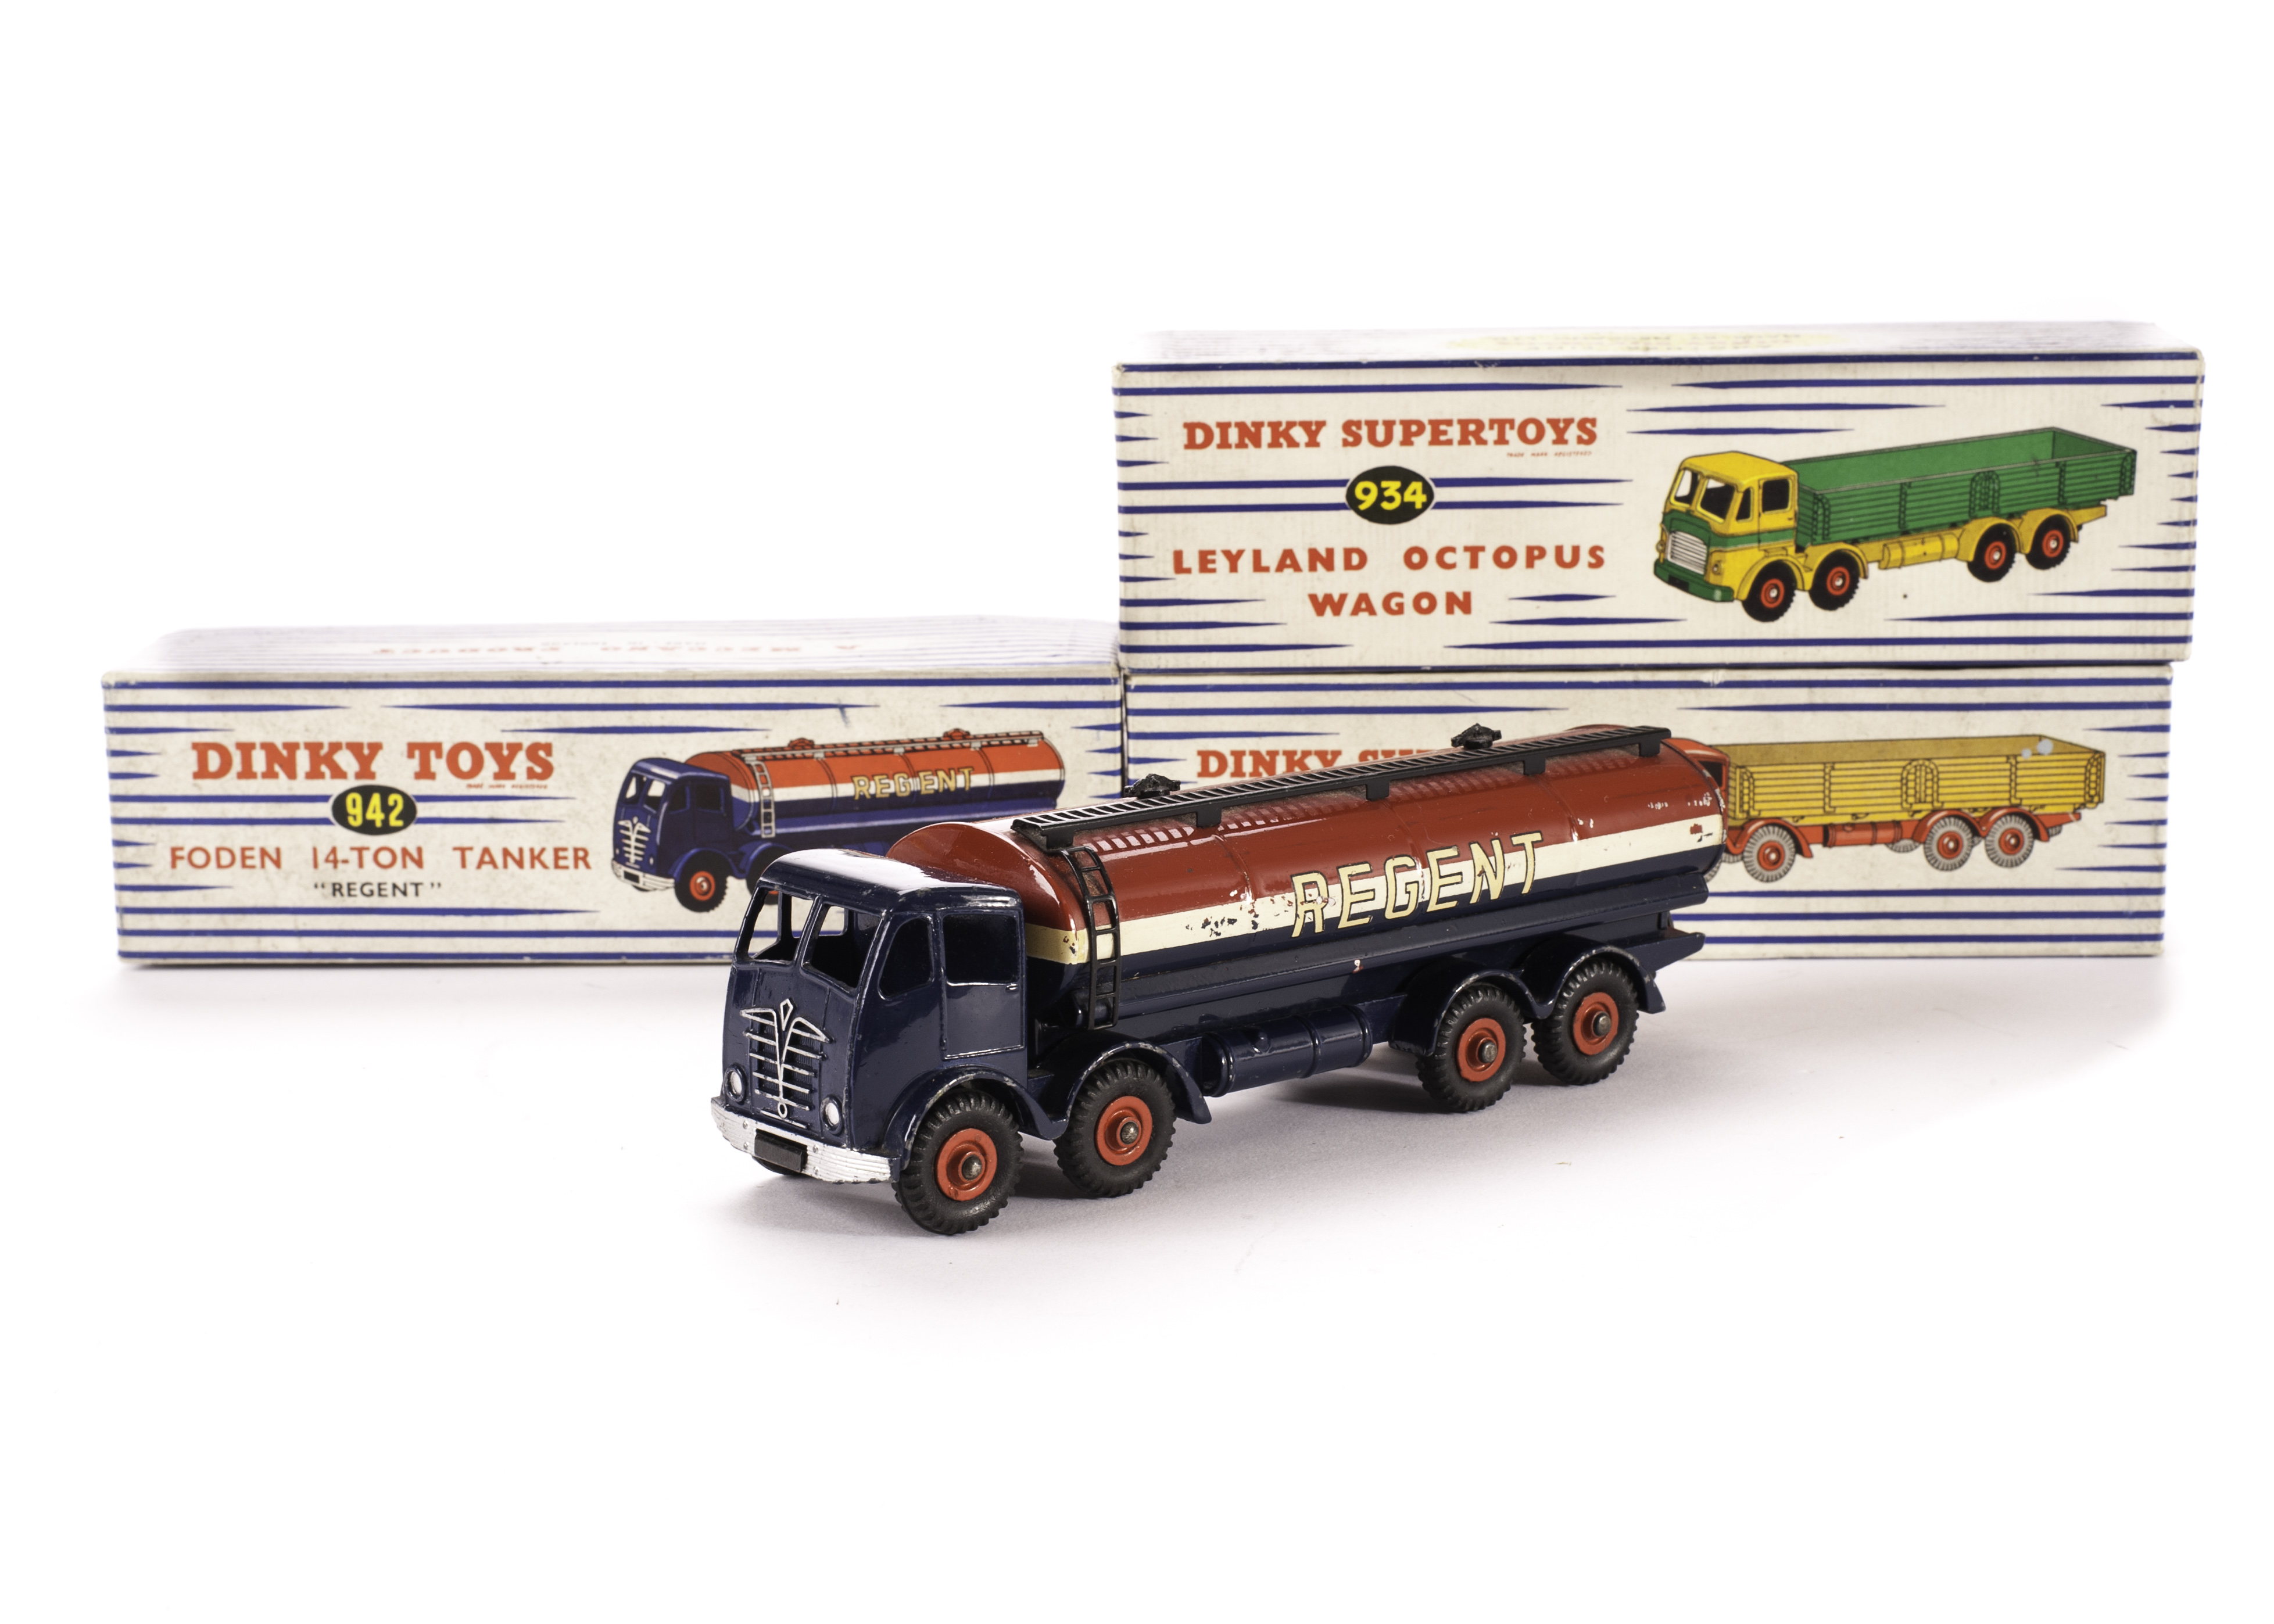 A Dinky Toys 942 Foden 14-Ton "Regent" Tanker, 2nd type dark blue cab and chassis, red grooved hubs,